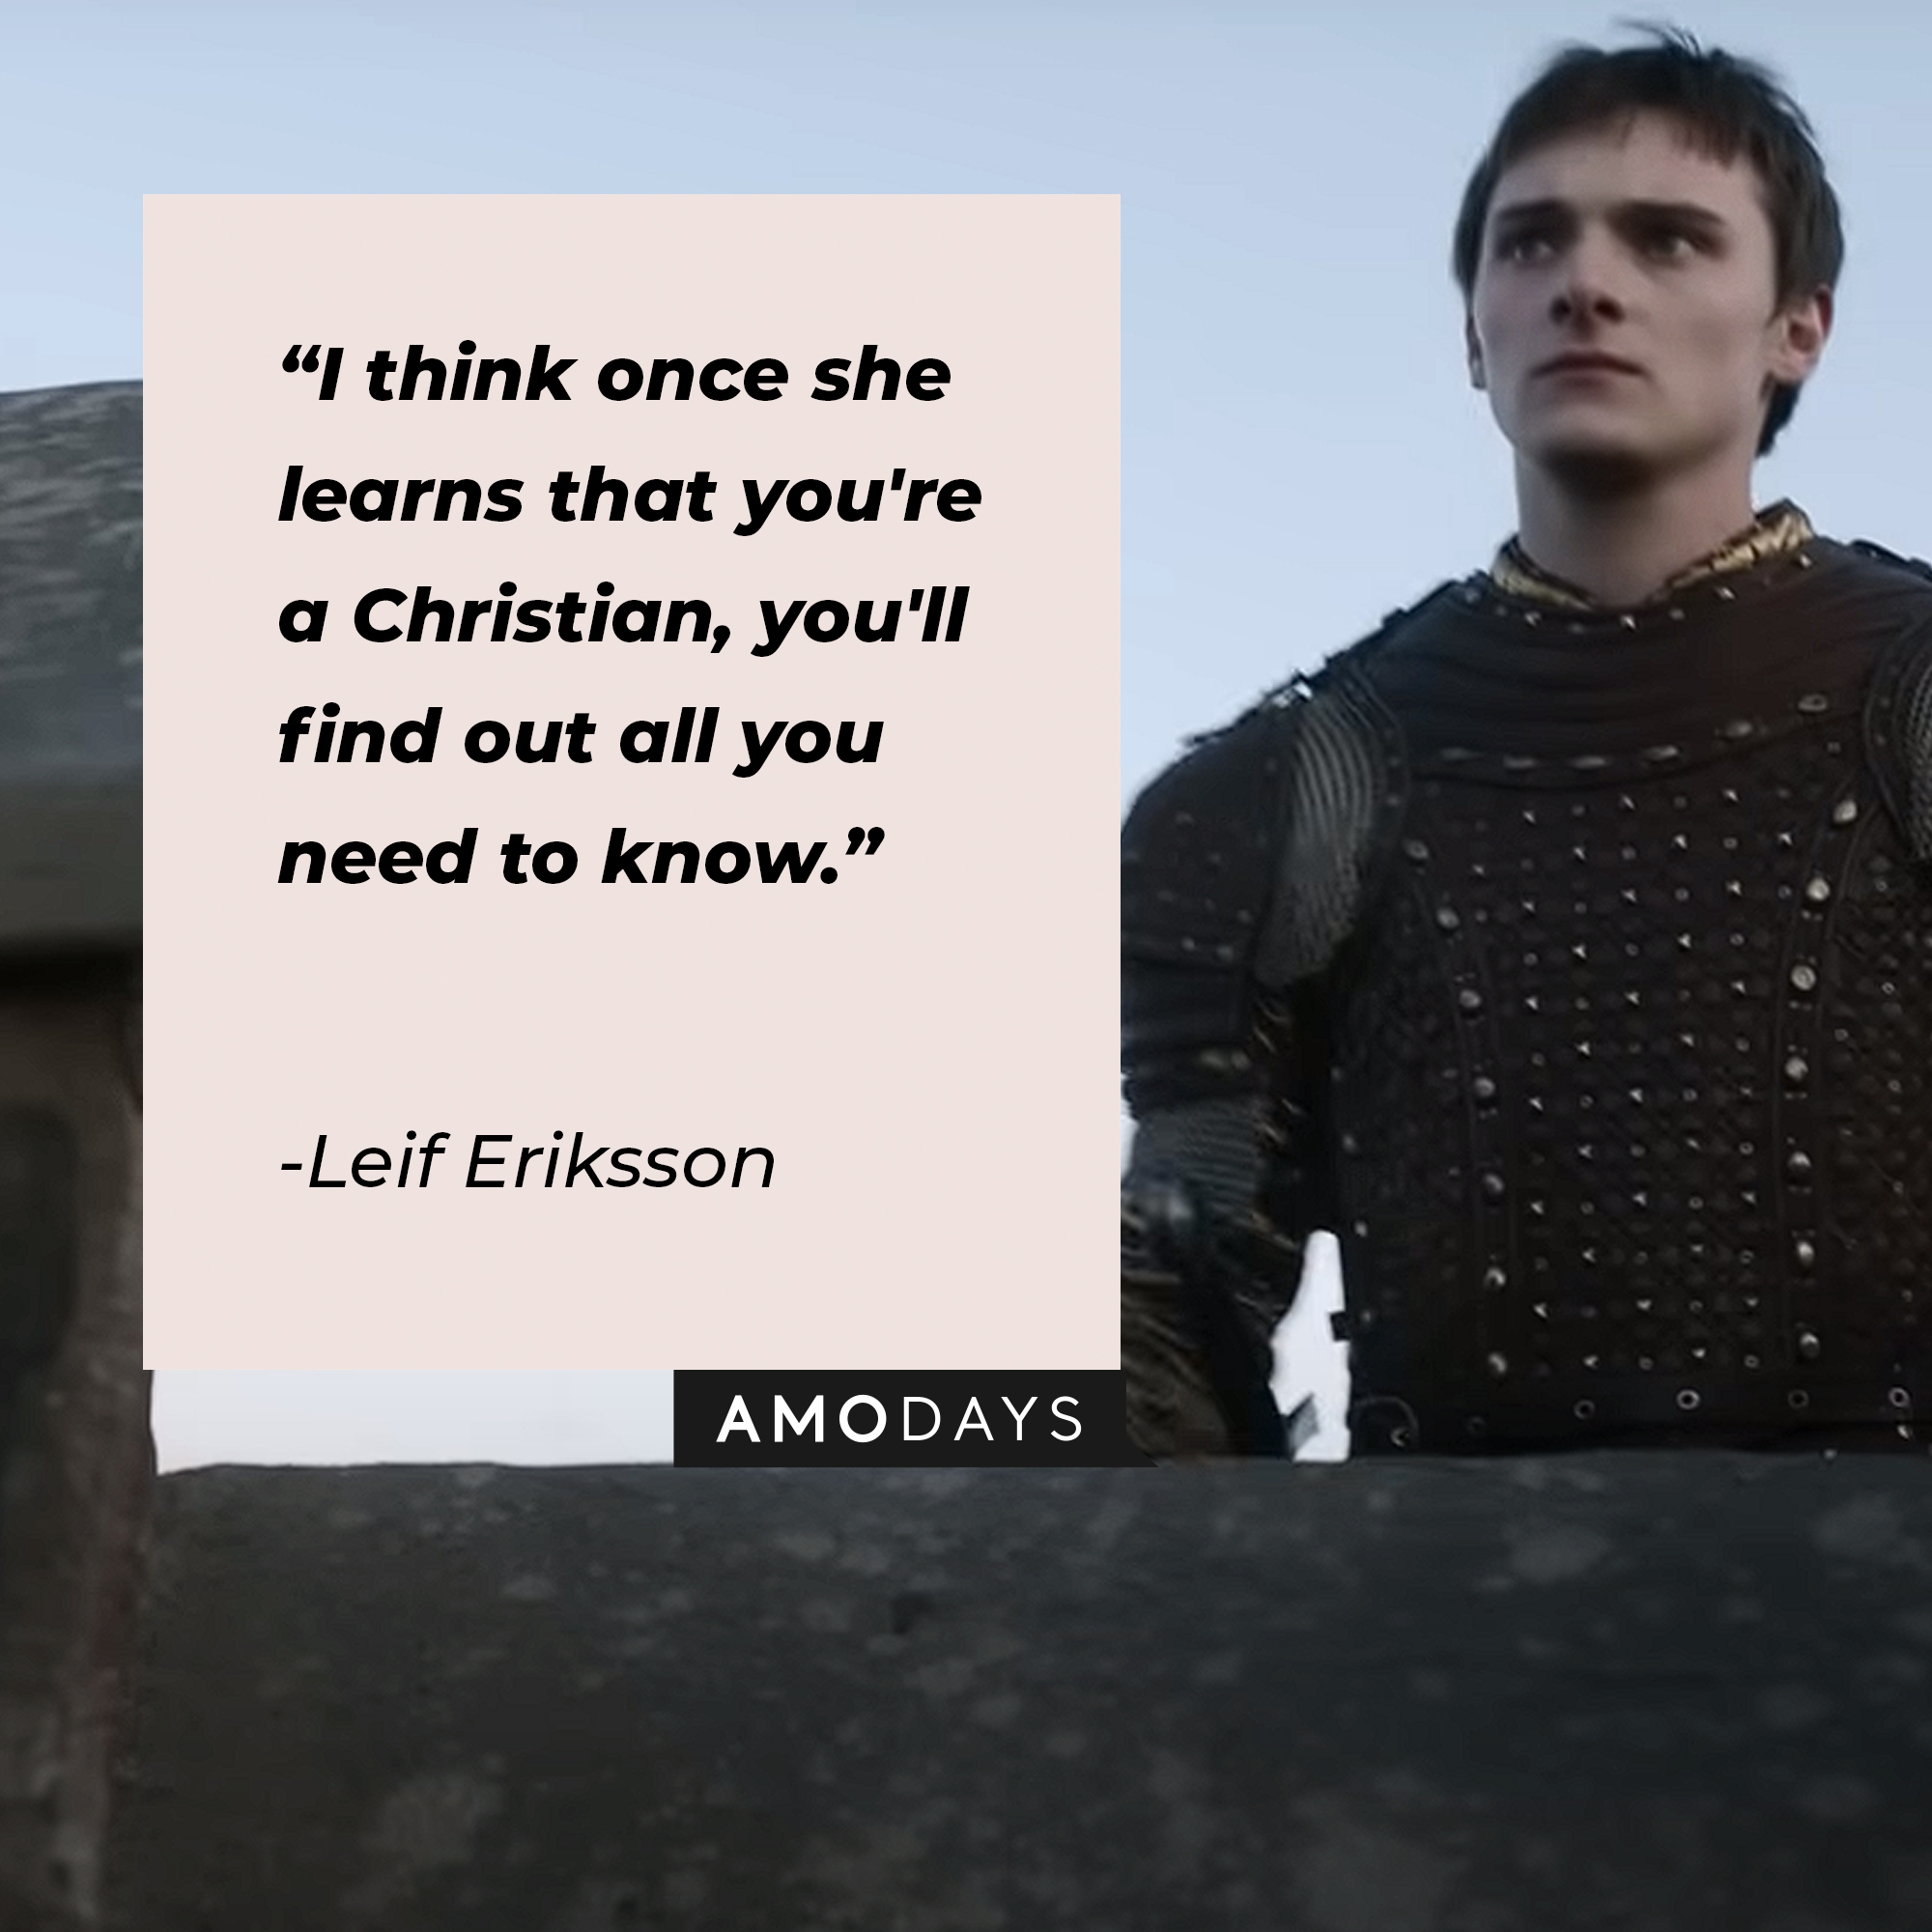 Leif Eriksson's quote: "I think once she learns that you're a Christian, you'll find out all you need to know." | Image: youtube.com/Netflix